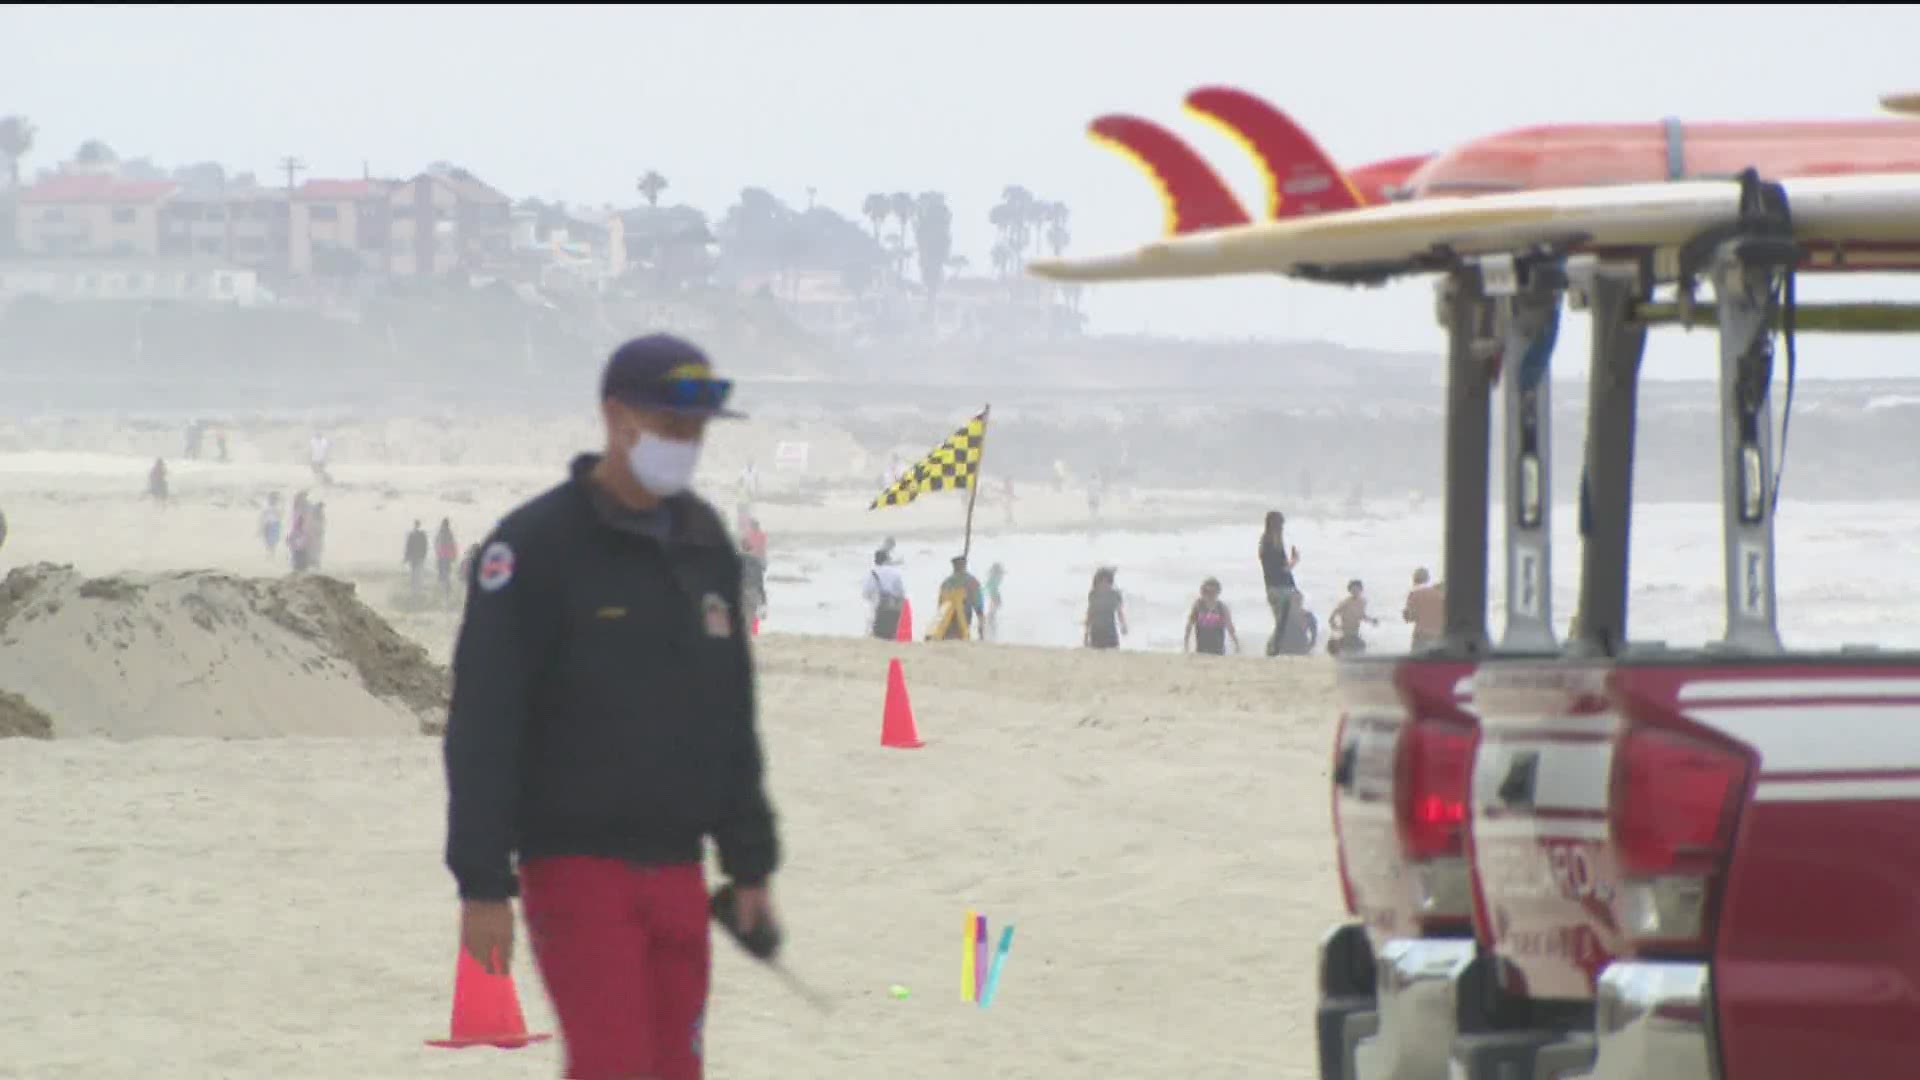 Many locals are still confused about which San Diego beaches are open.